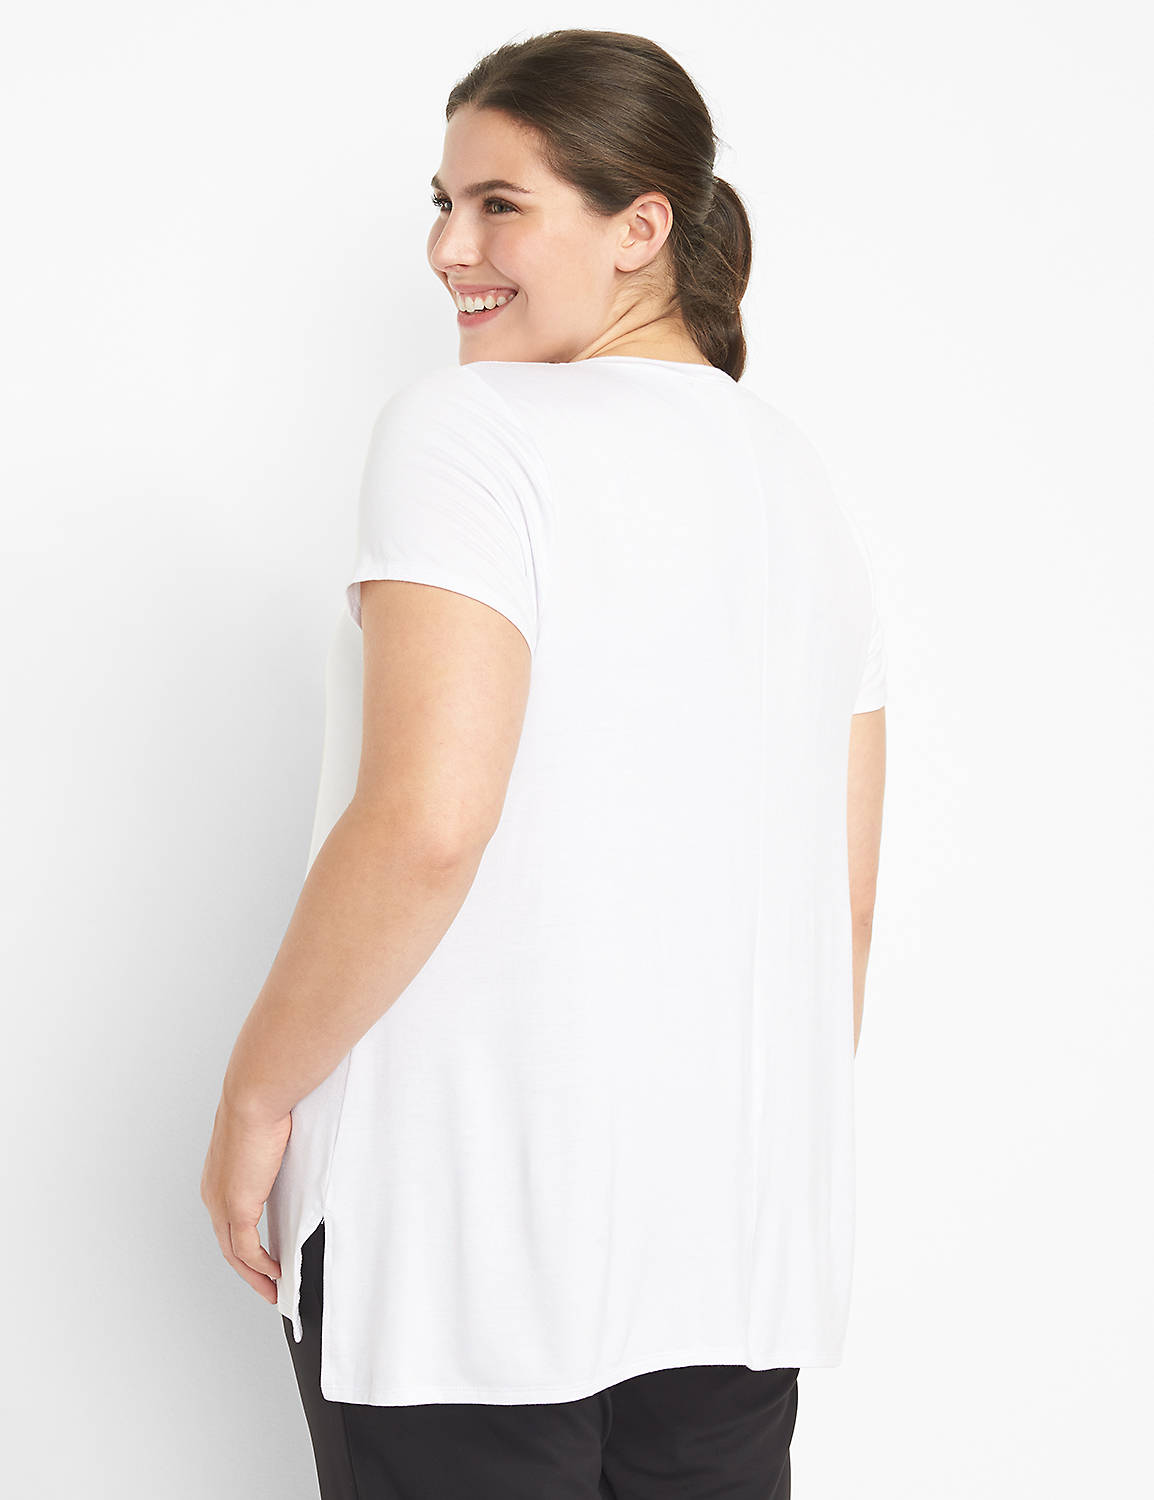 Short Sleeve Scoop Neck Side Slit Graphic Tee S 1118223:Ascena White:14/16 Product Image 2